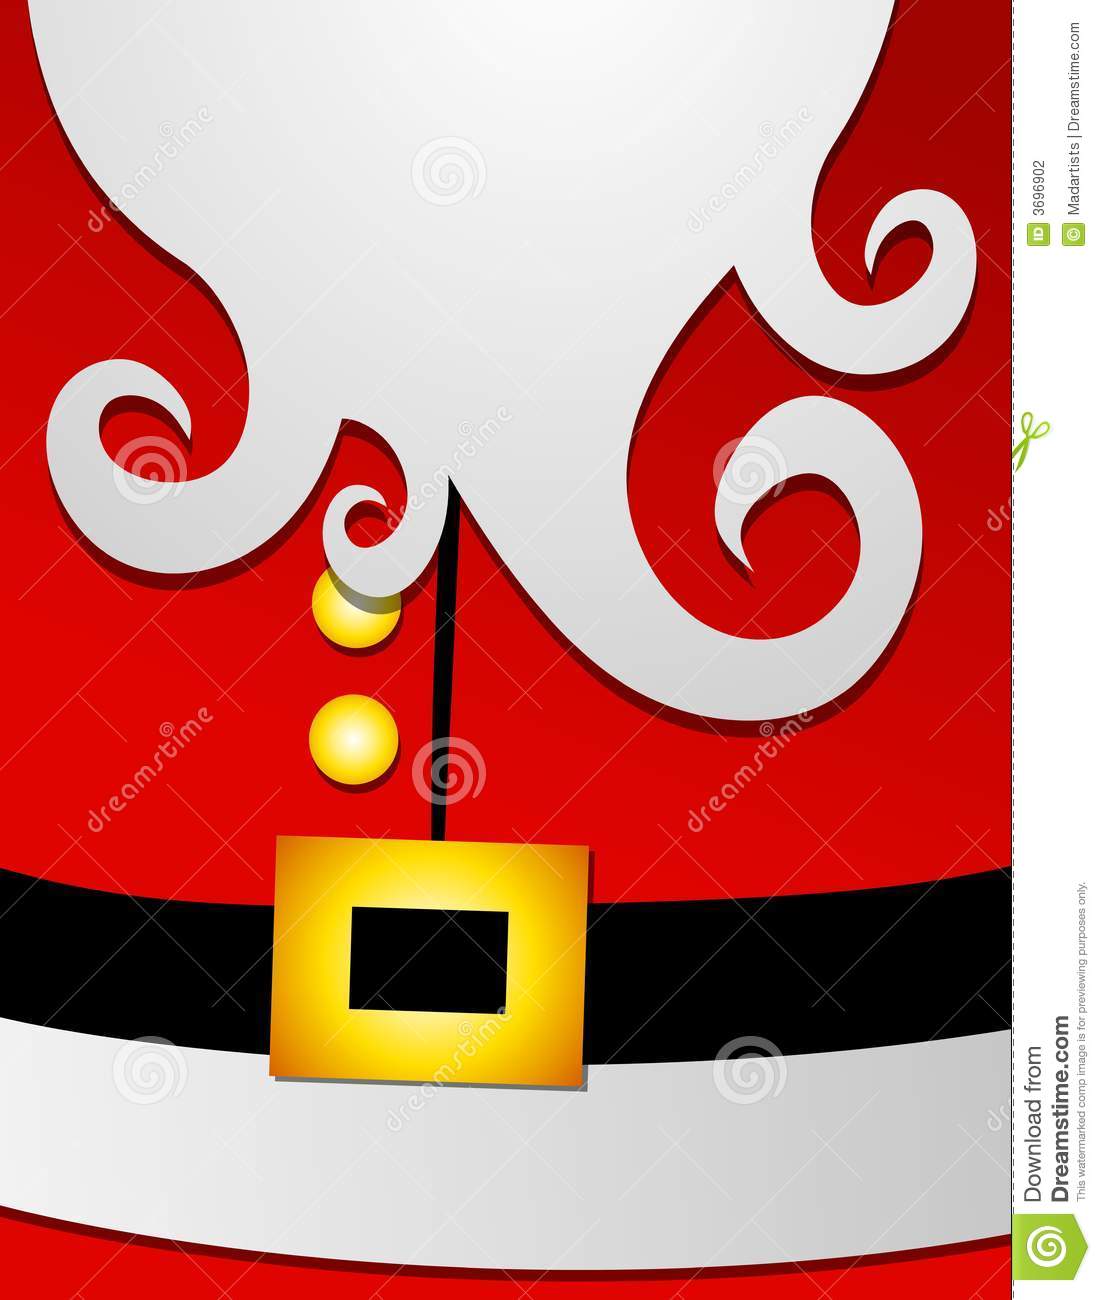 Santa Claus Suit Big Belly Profile 2 Stock Photography   Image